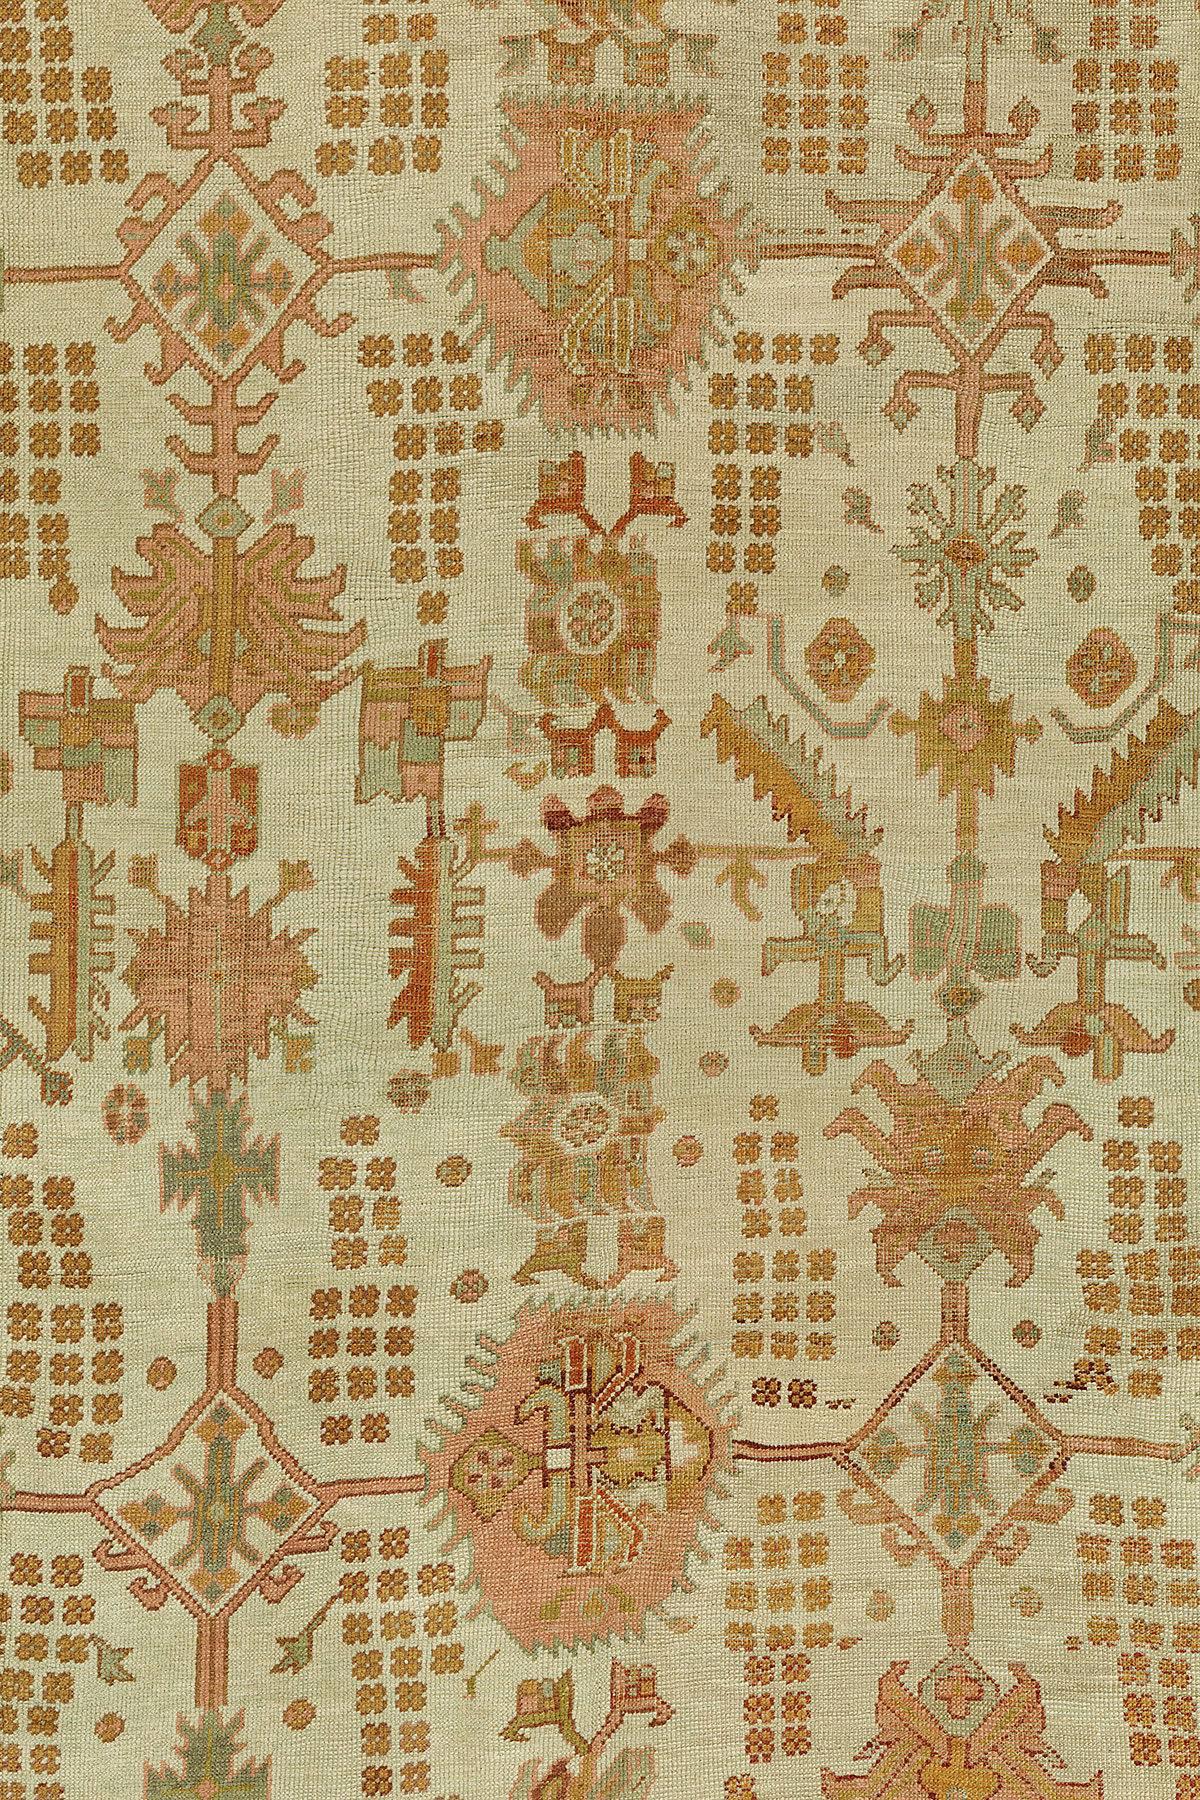 Antique Oushak carpet with an ivory colored ground, accents in pumpkin orange and teal.

Oushak in western Turkey has been a major center of rug production from the very beginning of the Ottoman period. Many of the great masterpieces of early